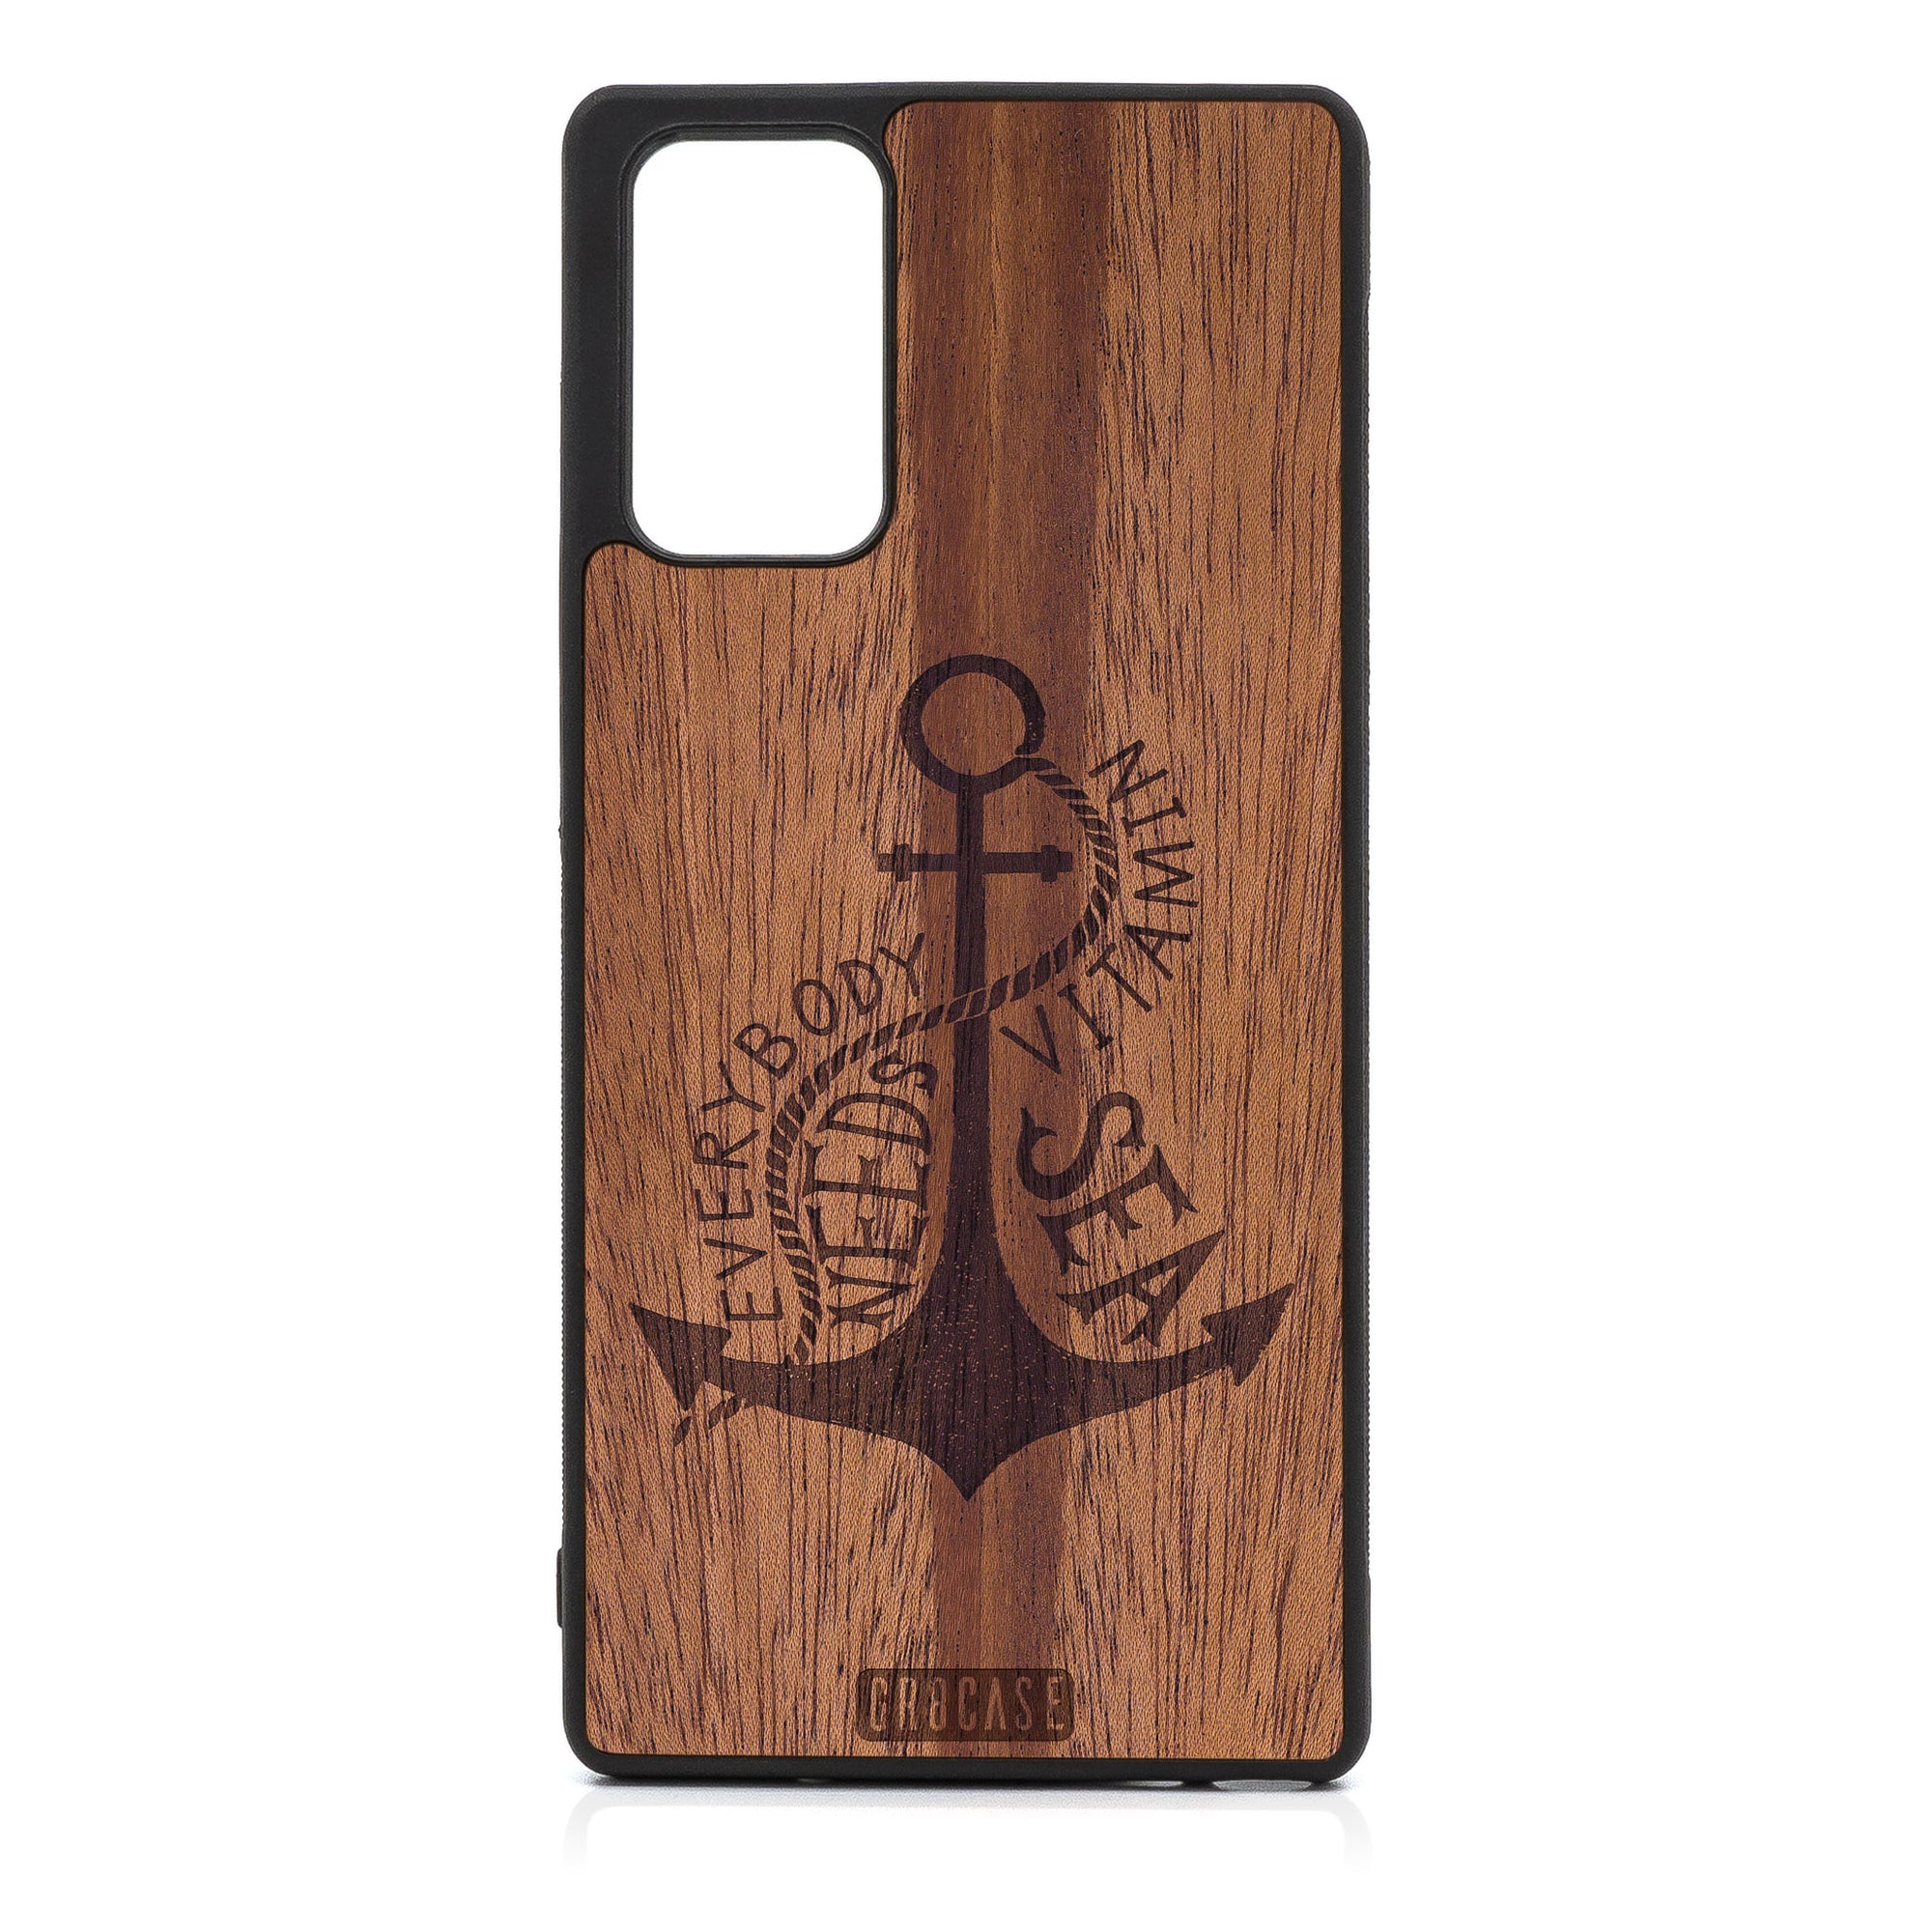 Everybody Needs Vitamin Sea (Anchor) Design Wood Case For Samsung Galaxy Note 20